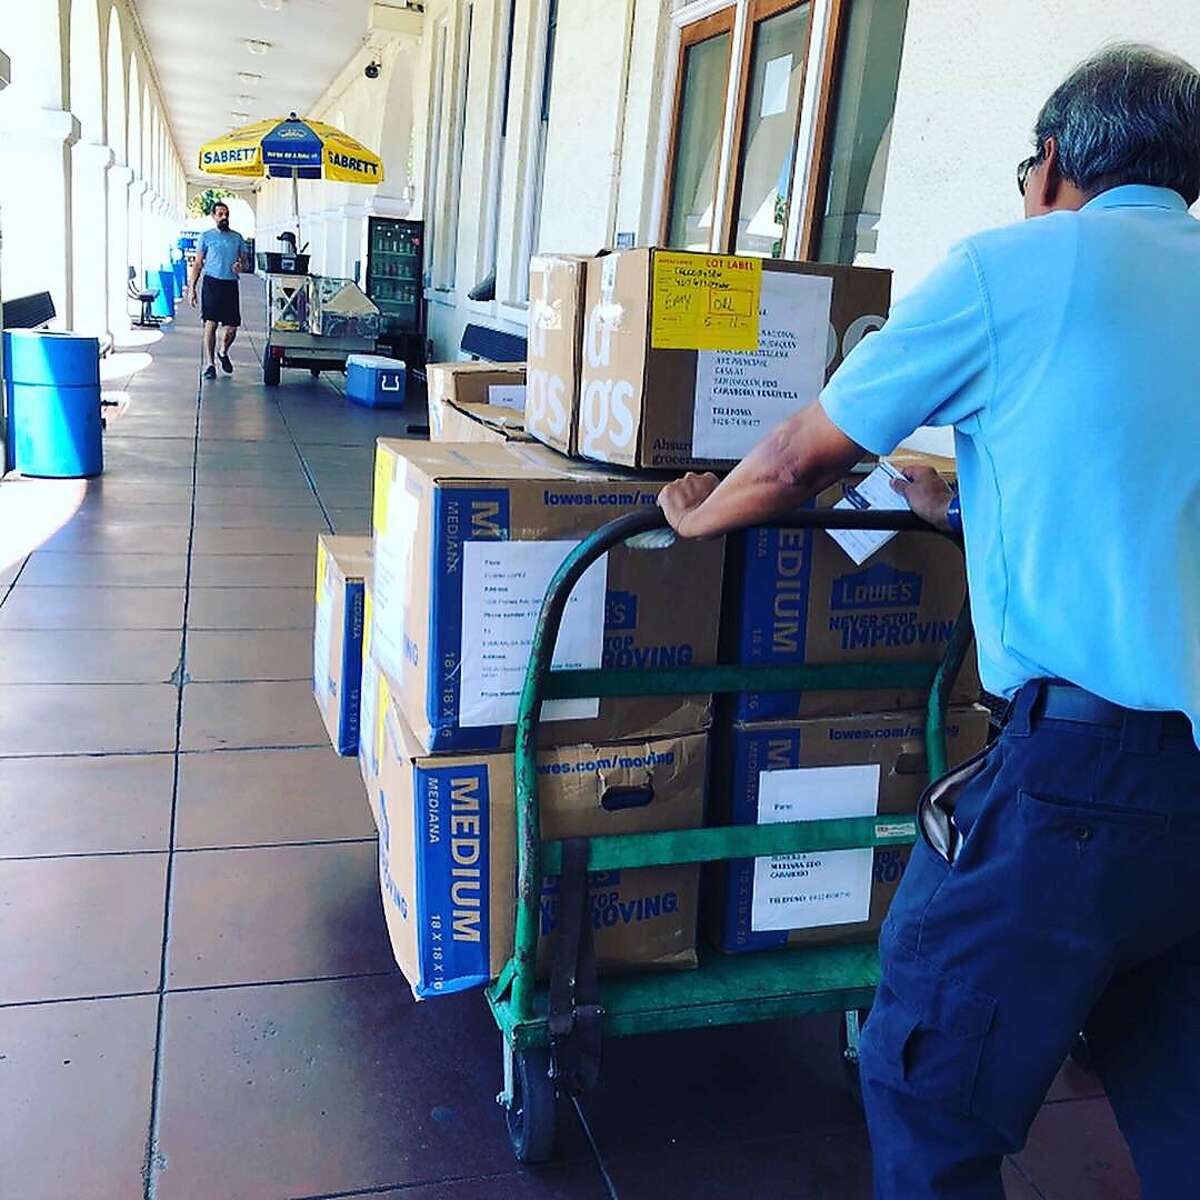 Moving those boxes for the babies of Venezuela